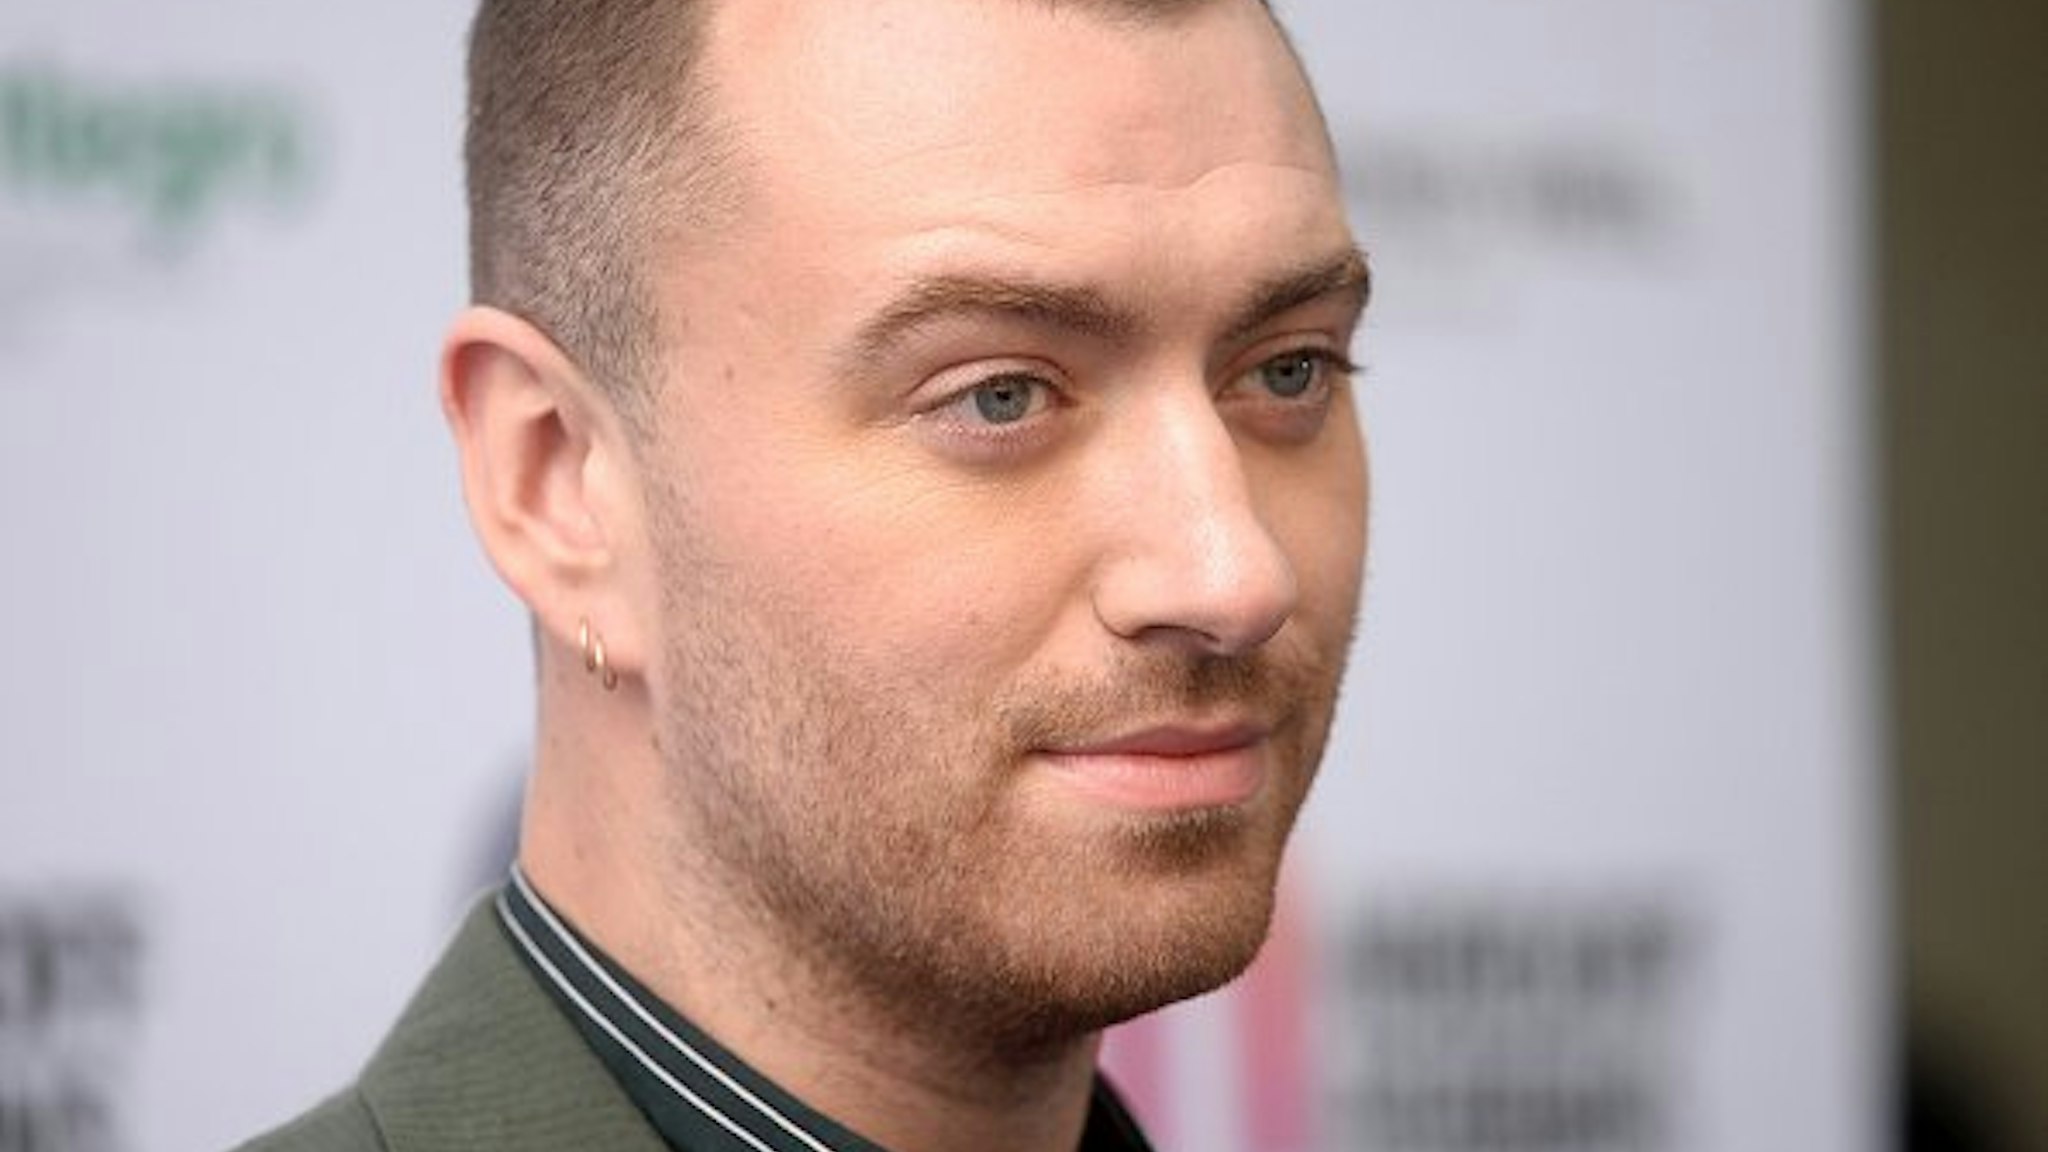 Sam Smith attends the Nordoff Robbins O2 Silver Clef Awards 2019 at Grosvenor House on July 05, 2019 in London, England